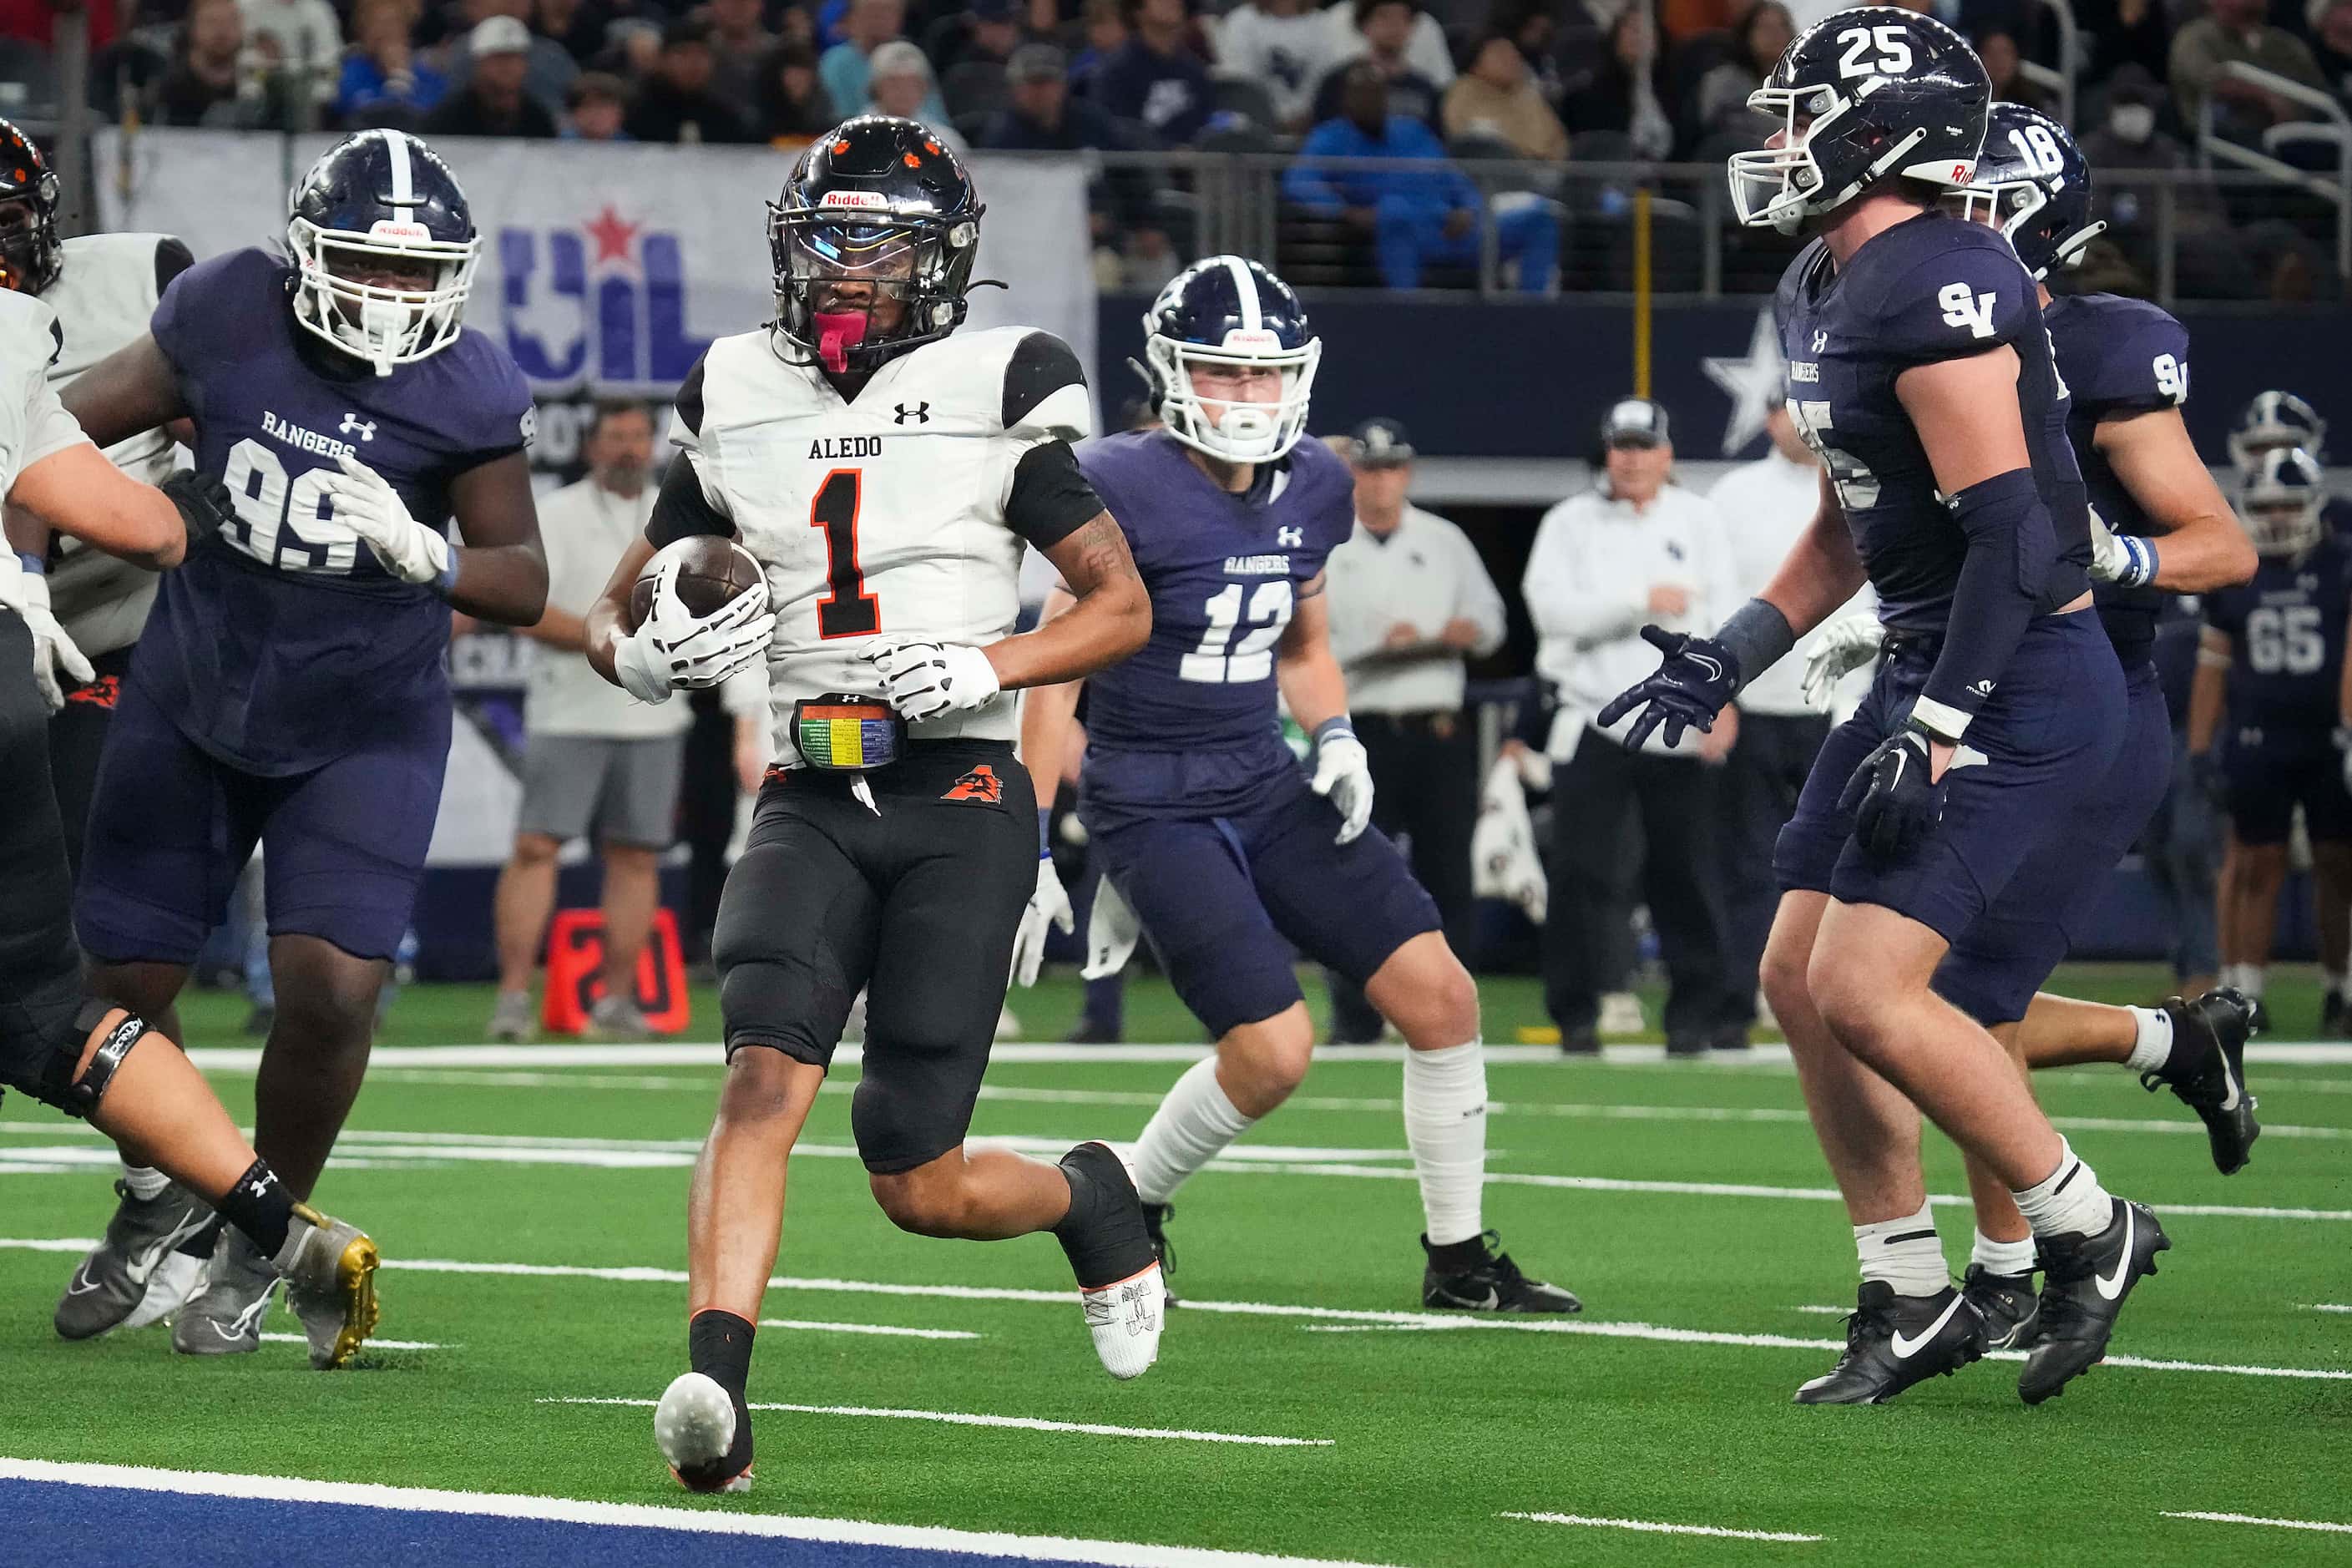 Aledo's Hawk Patrick-Daniels (1) scores on a 7-yard touchdown run during the first half of...